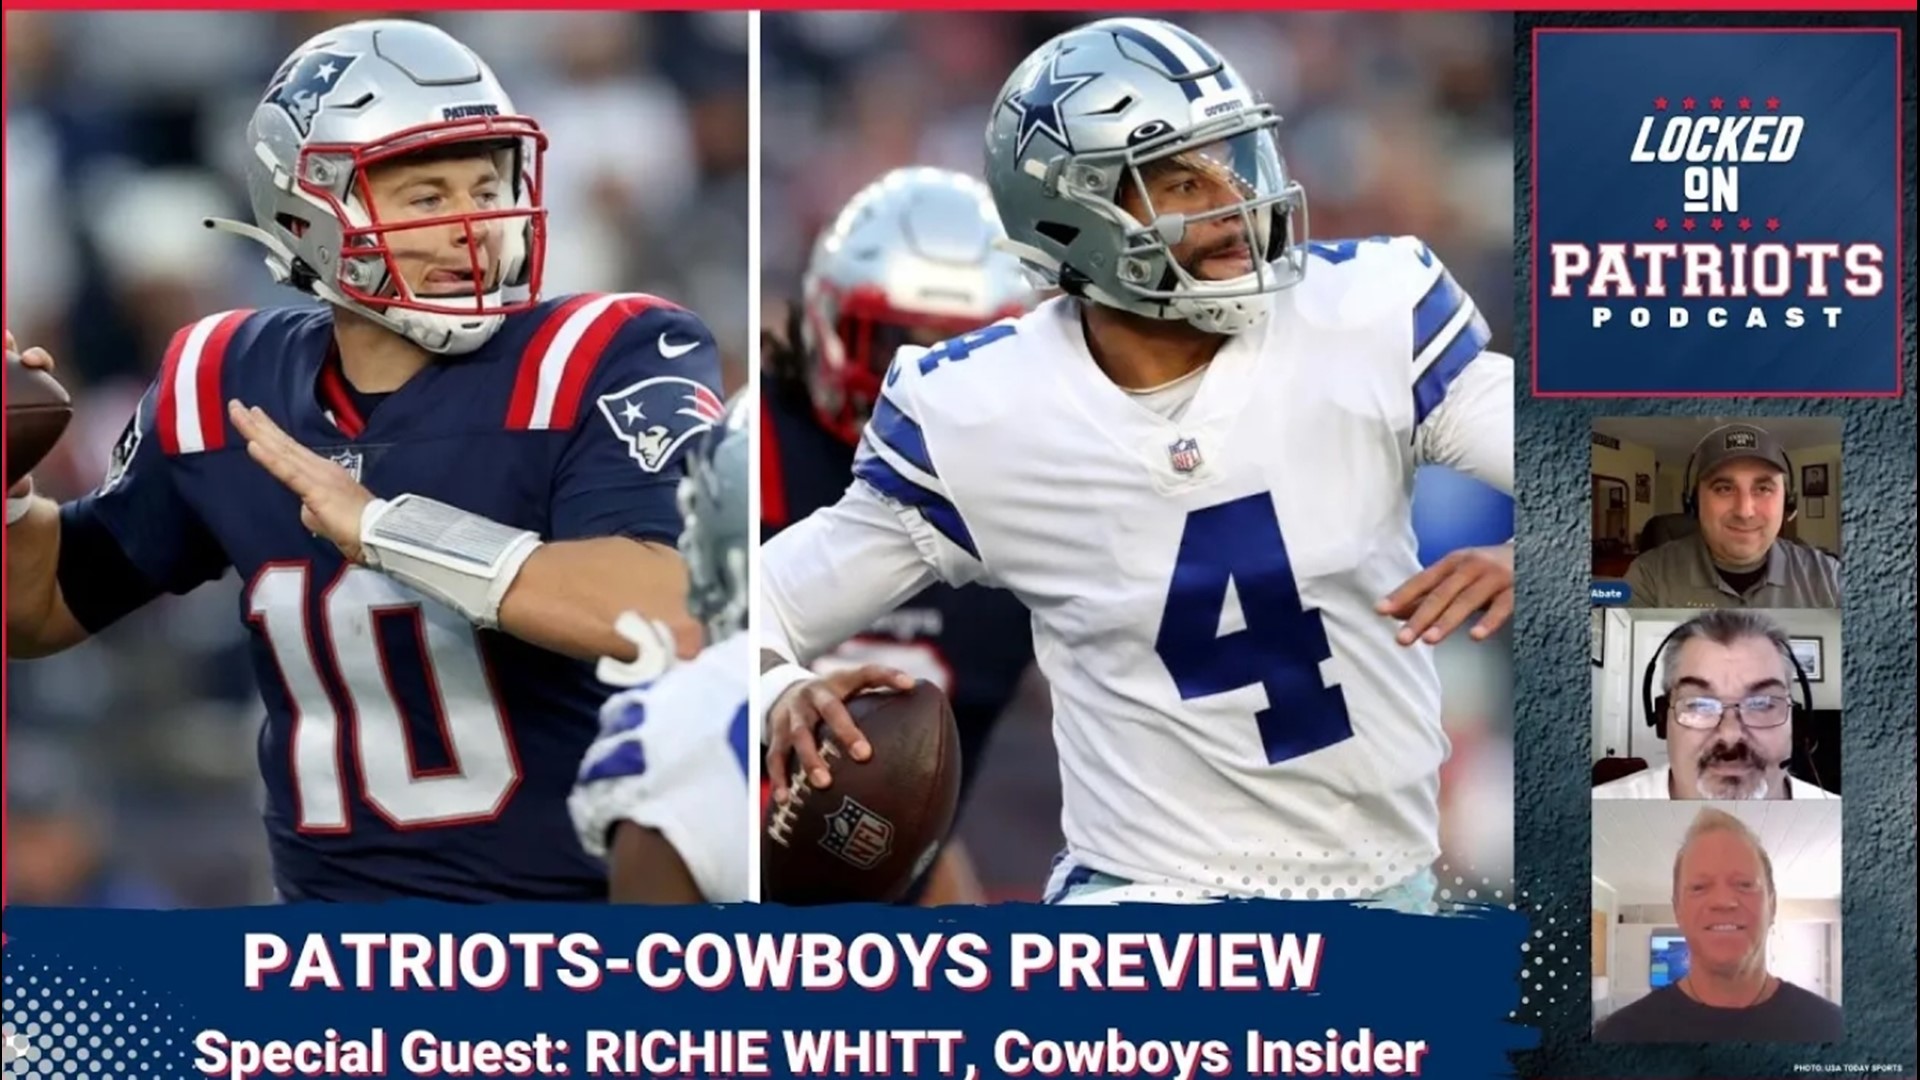 The New England Patriots are set for their Week 4 showdown with the Dallas Cowboys at AT&T Stadium this Sunday in Arlington, TX.